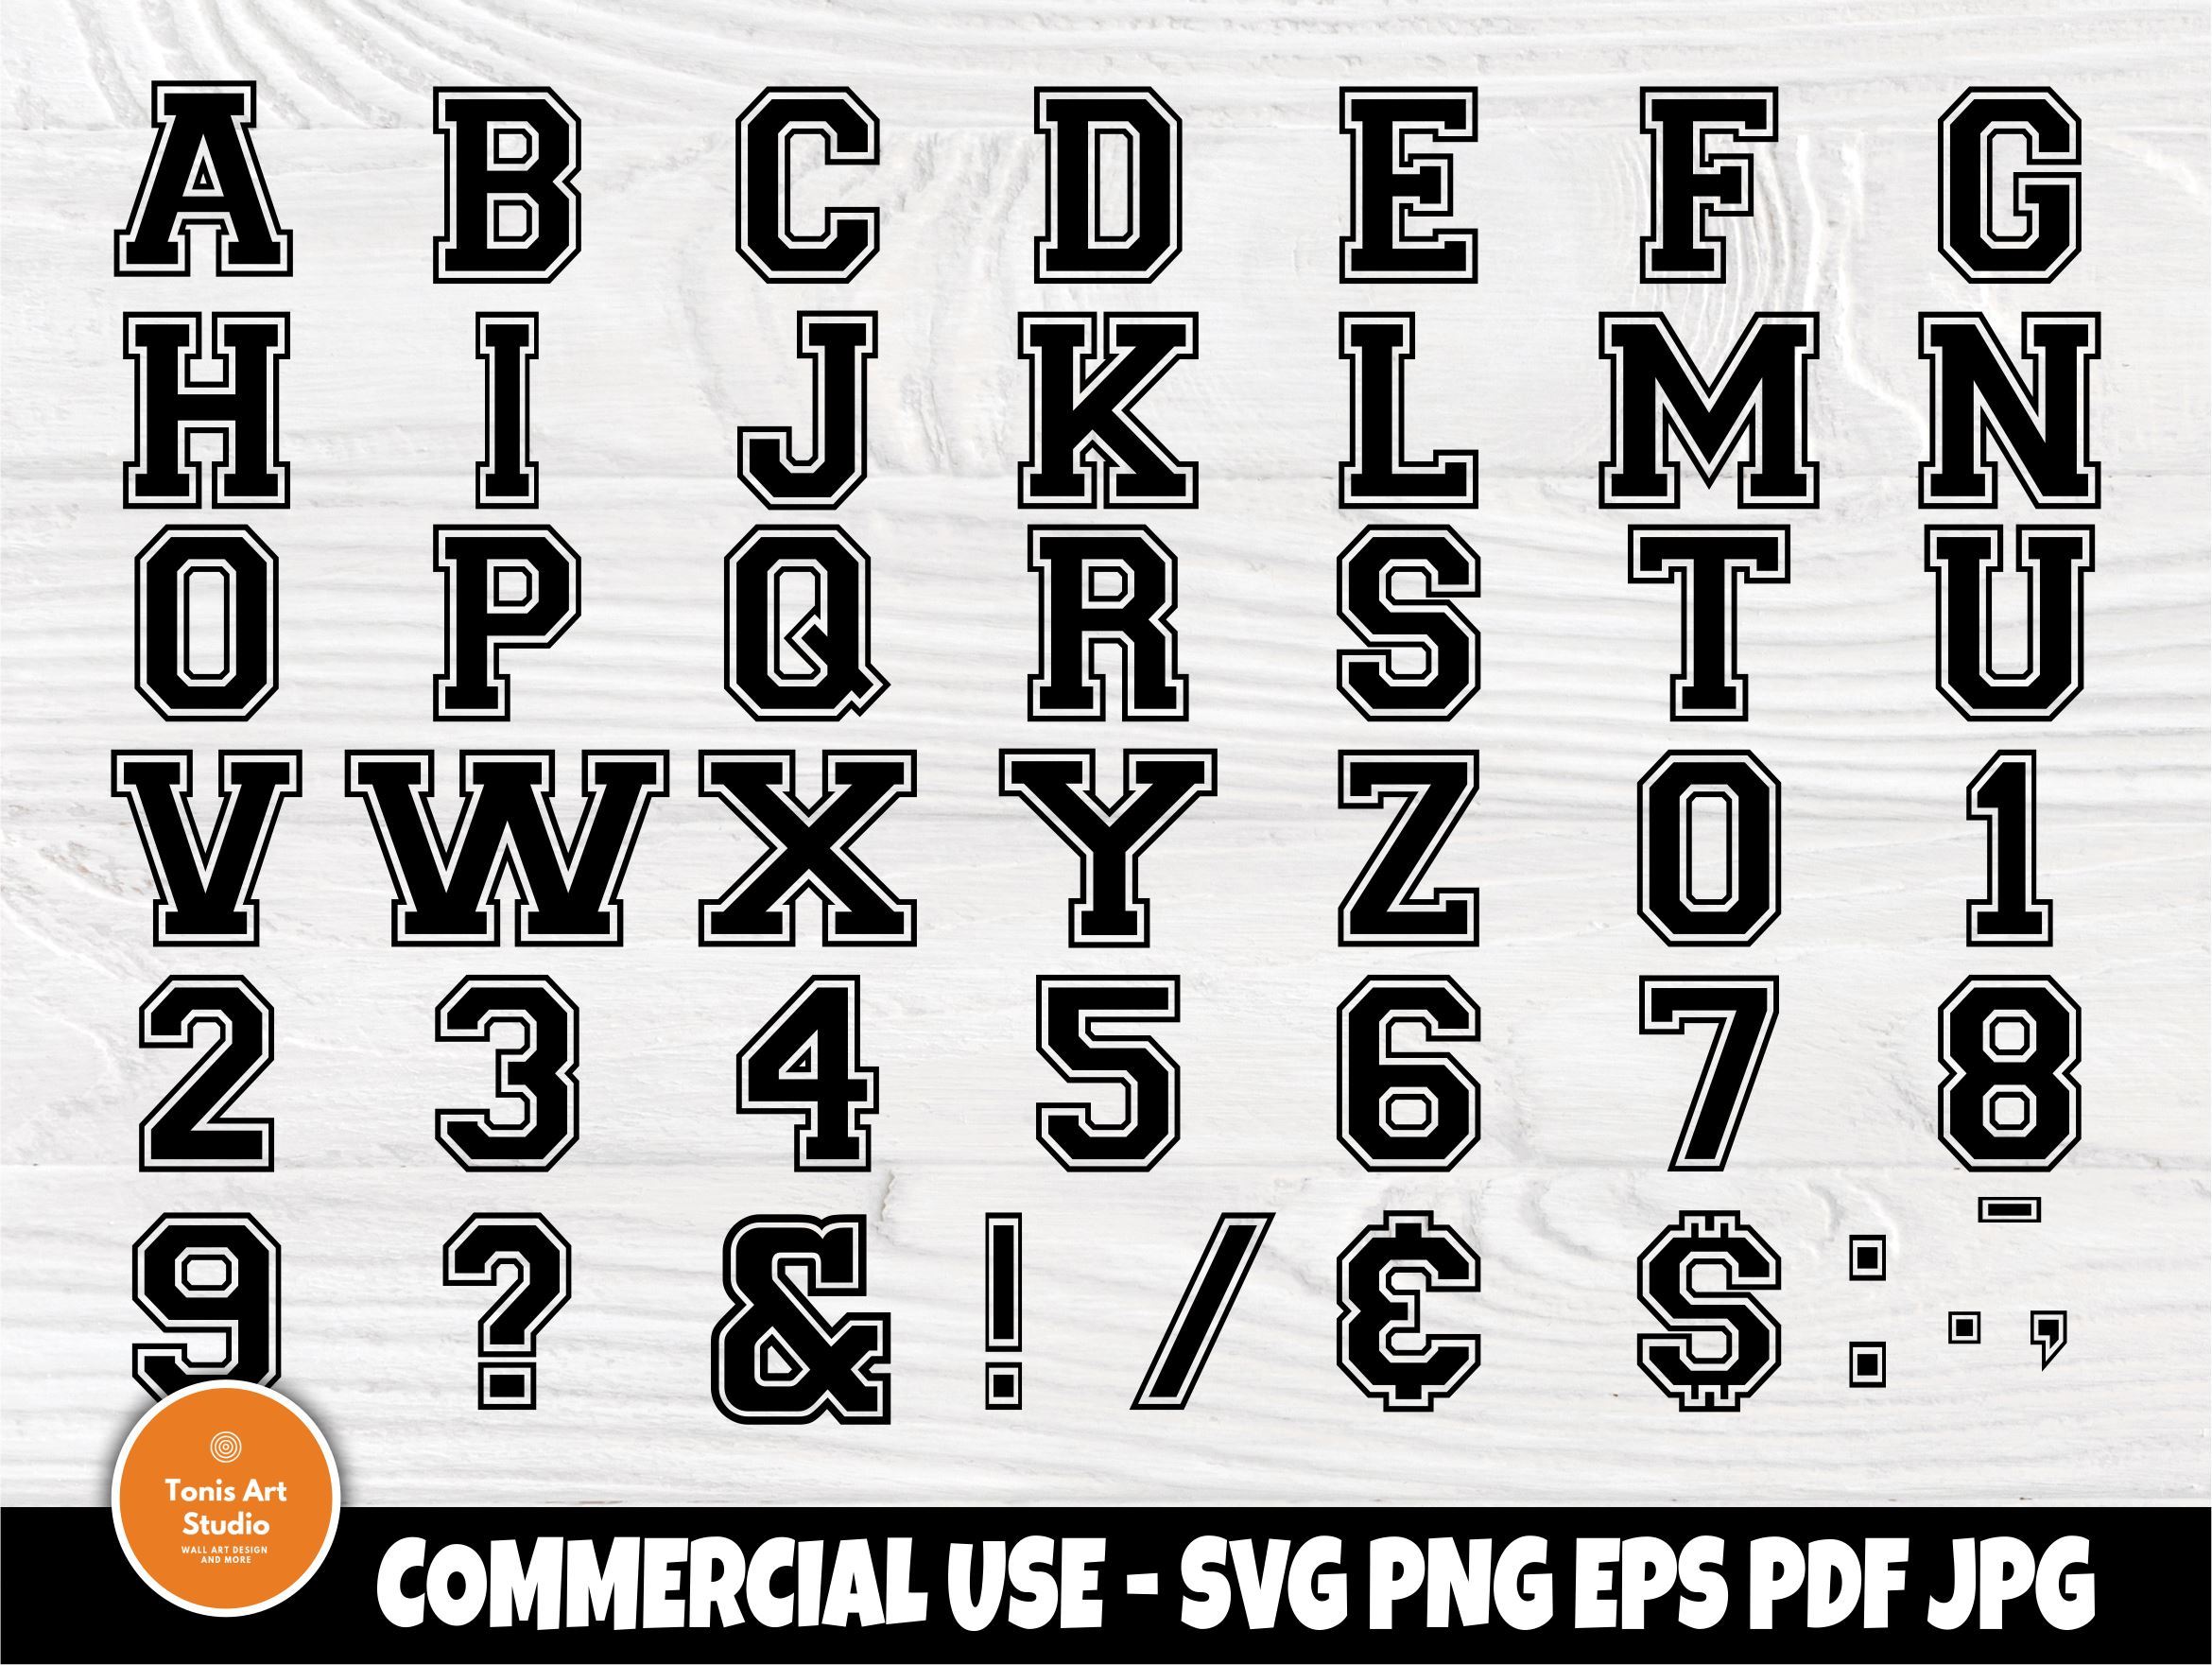 Sports Jersey Font Numbers Svg